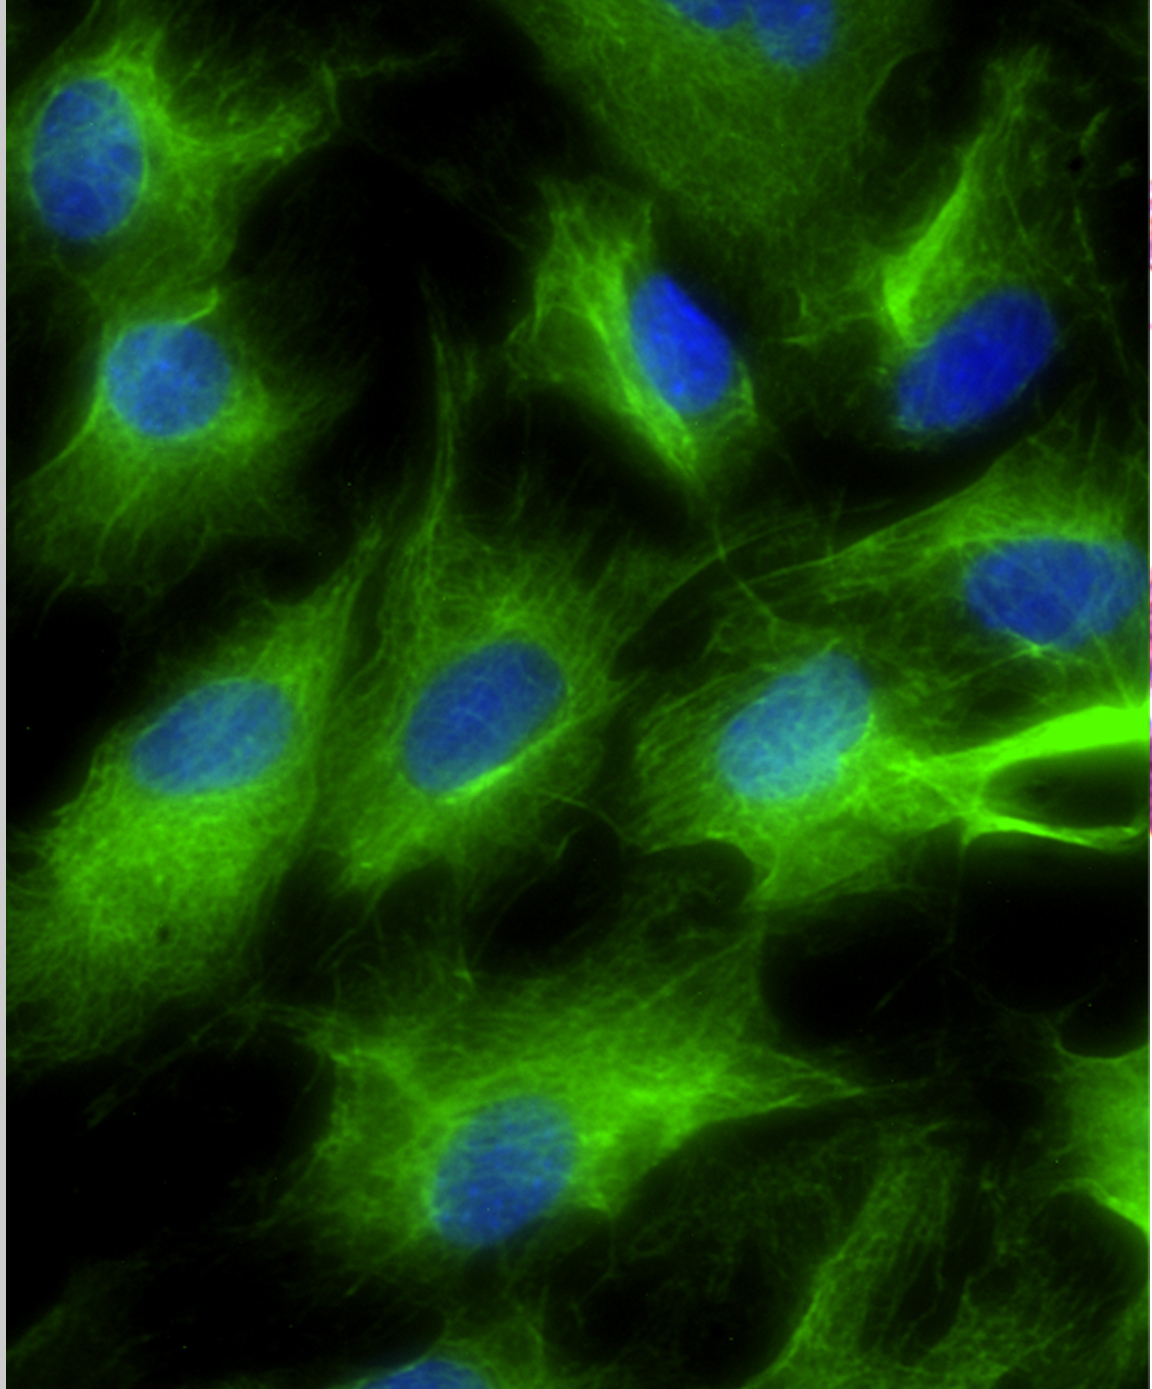 Fibroblasts transformed into induced thymic epithelial cells (iTEC) in vitro; iTEC are shown in green.Credit Nick Bredenkamp